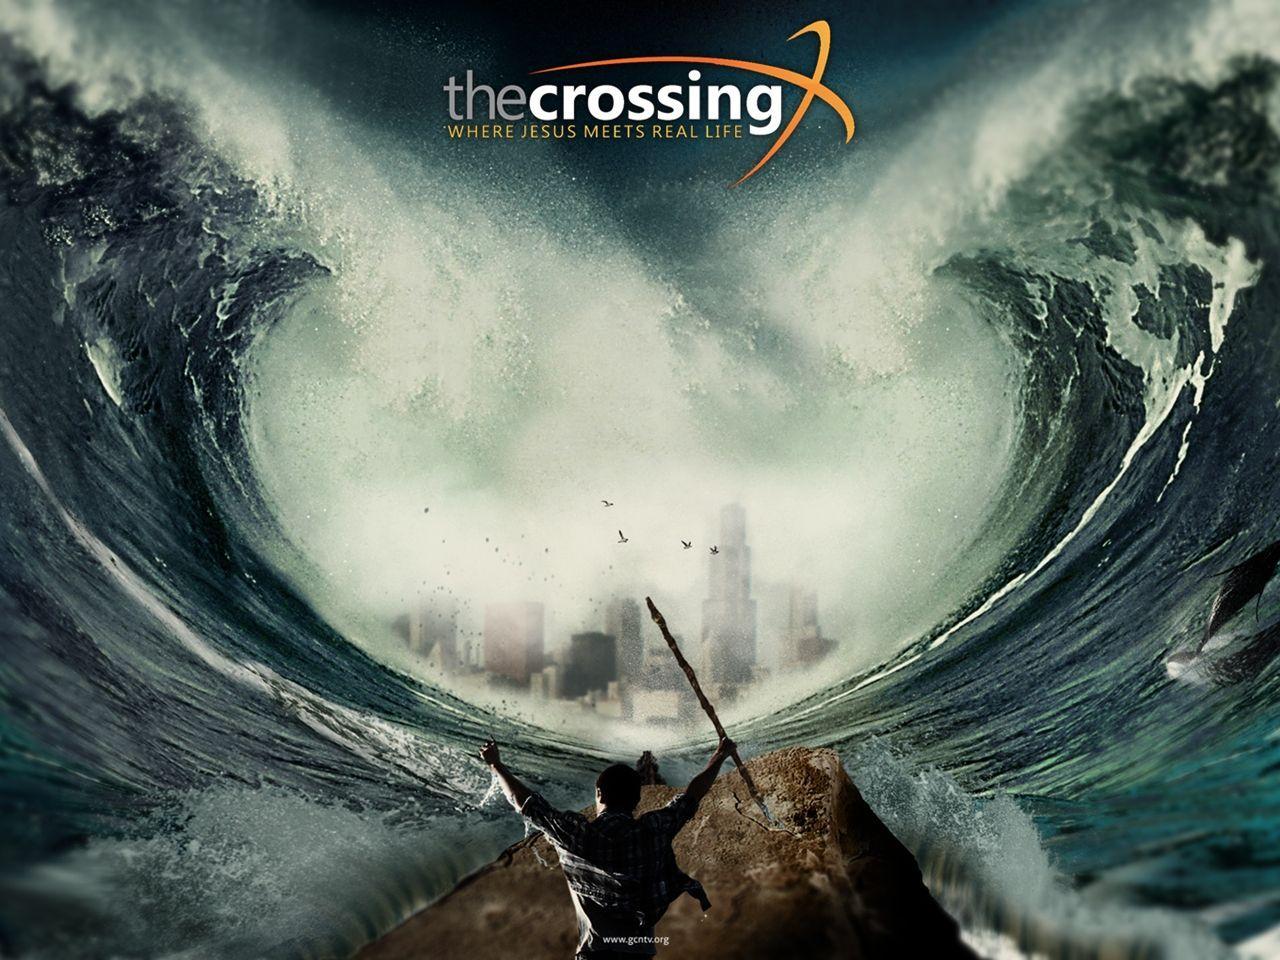 Moses The Crossing Where Jesus Meets Real Life 1280x960